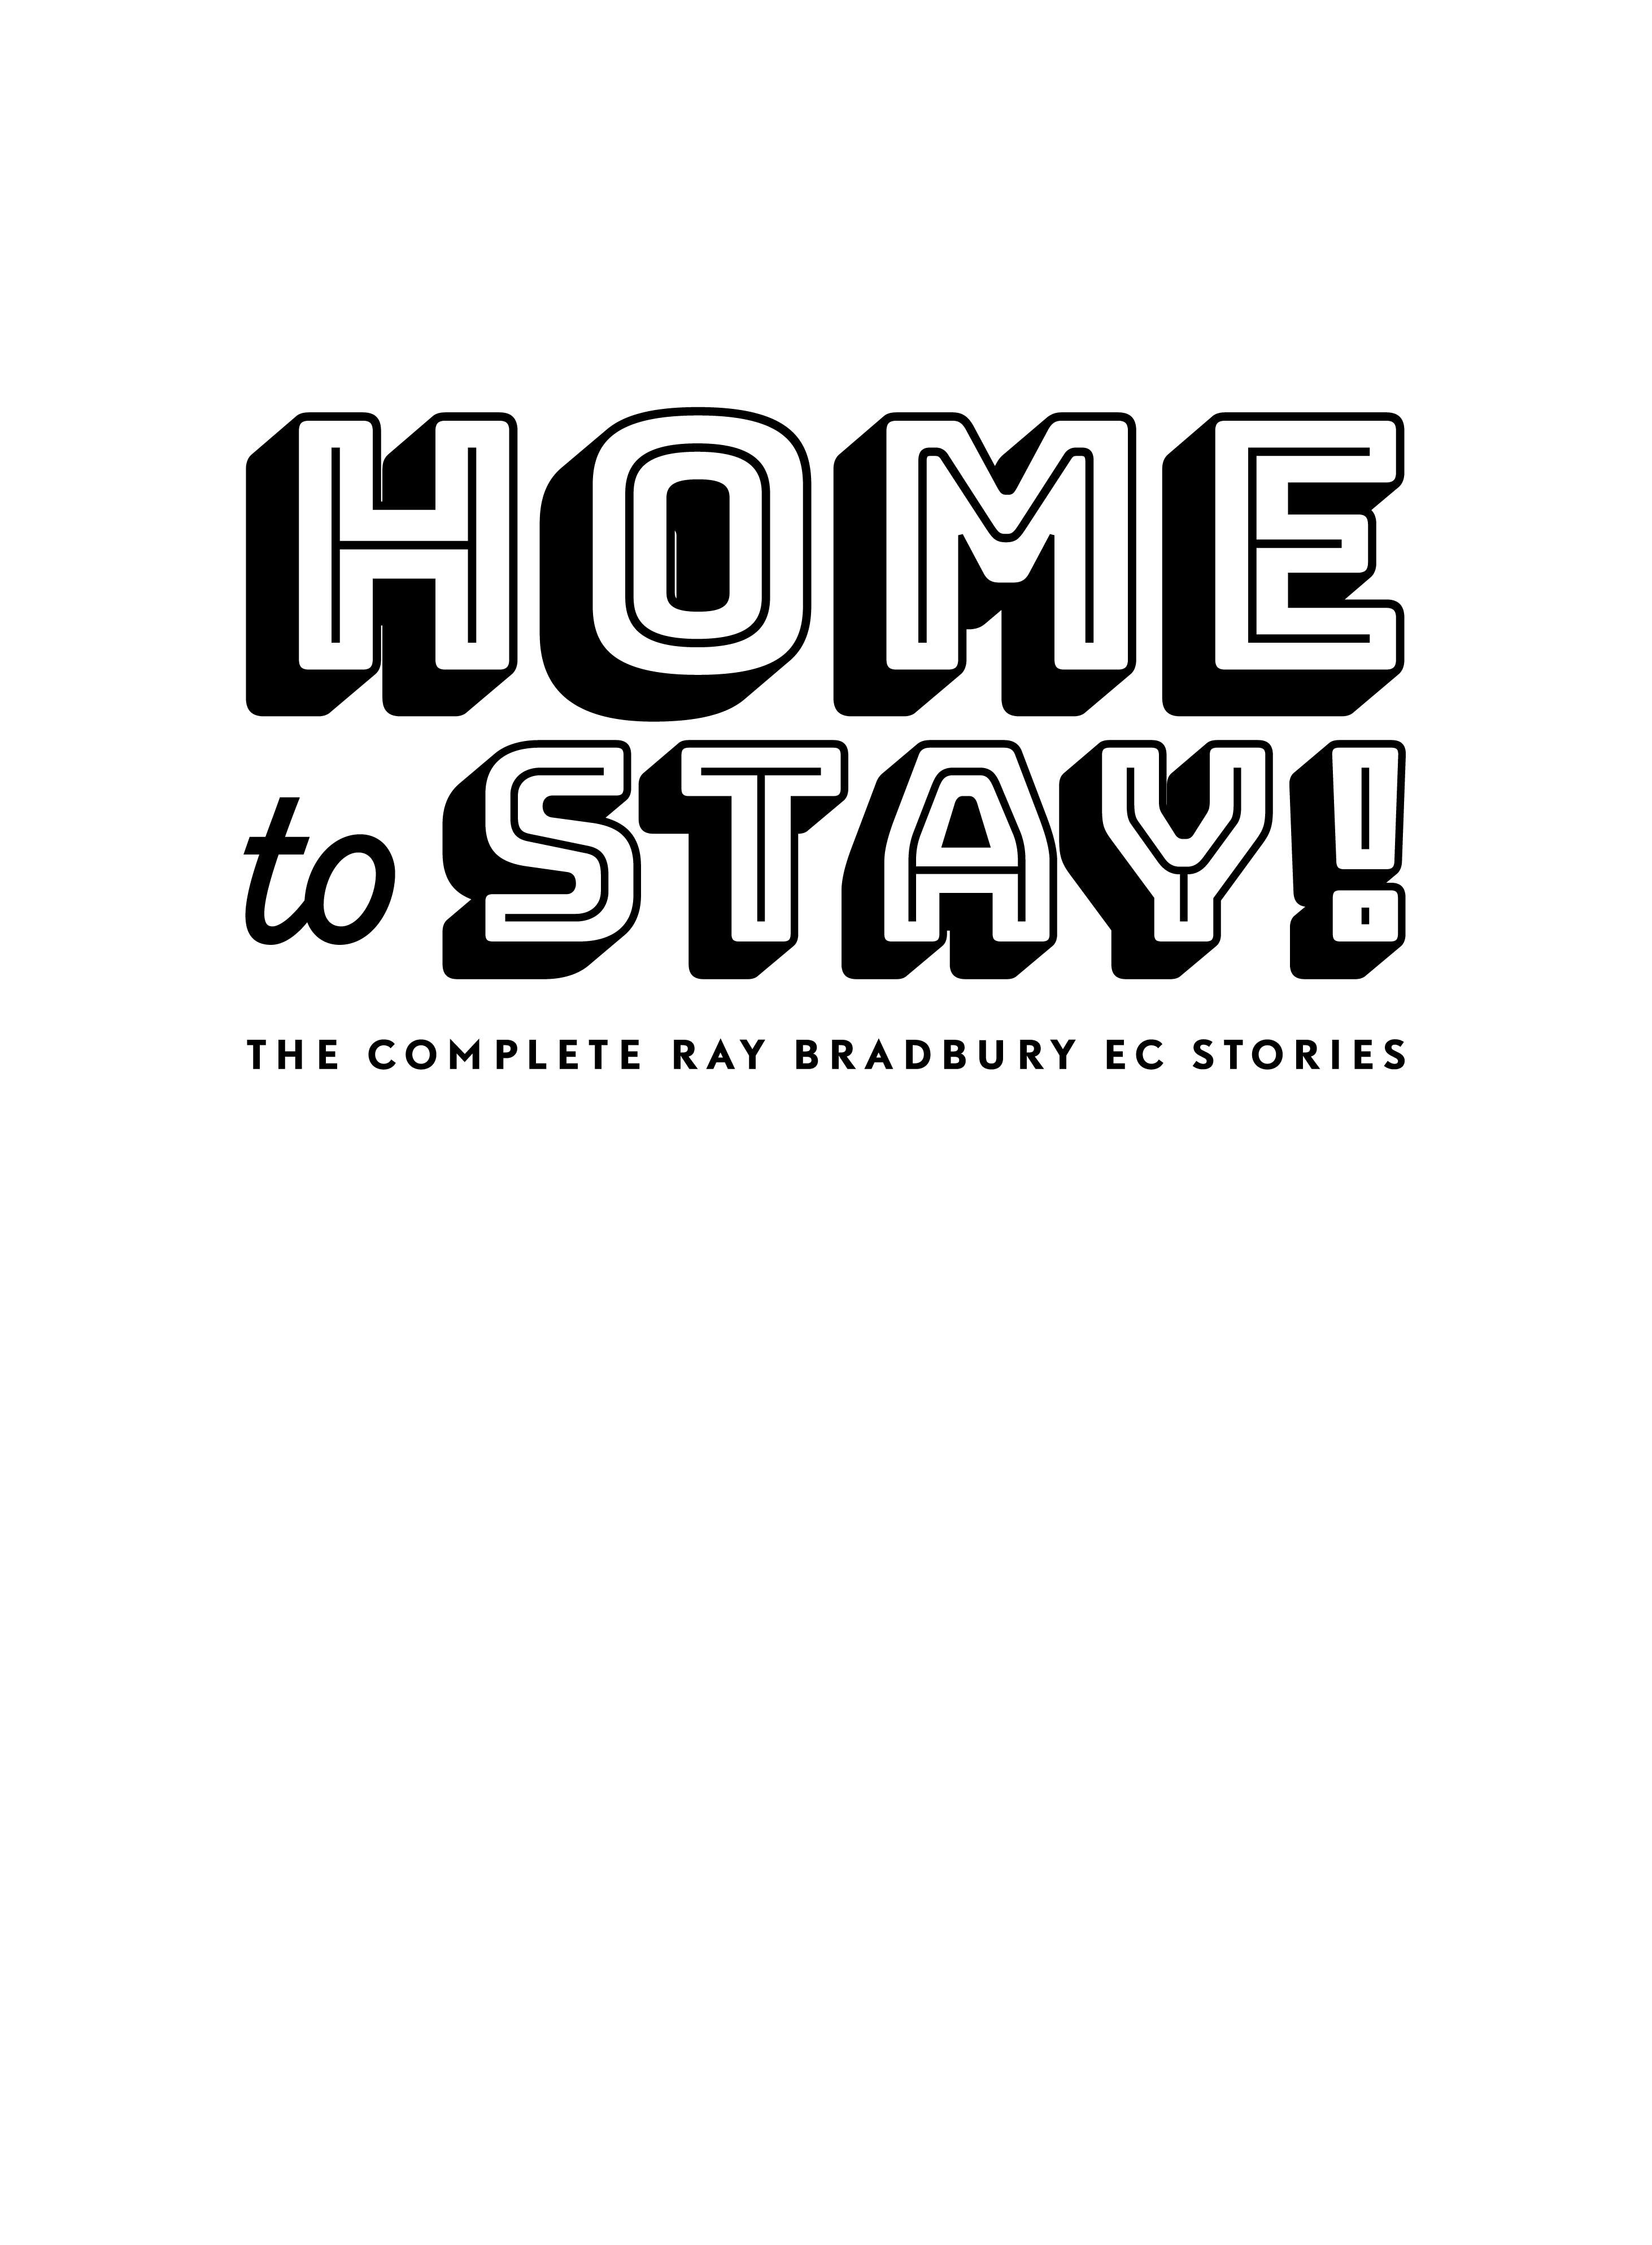 Read online Home to Stay!: The Complete Ray Bradbury EC Stories comic -  Issue # TPB (Part 1) - 2